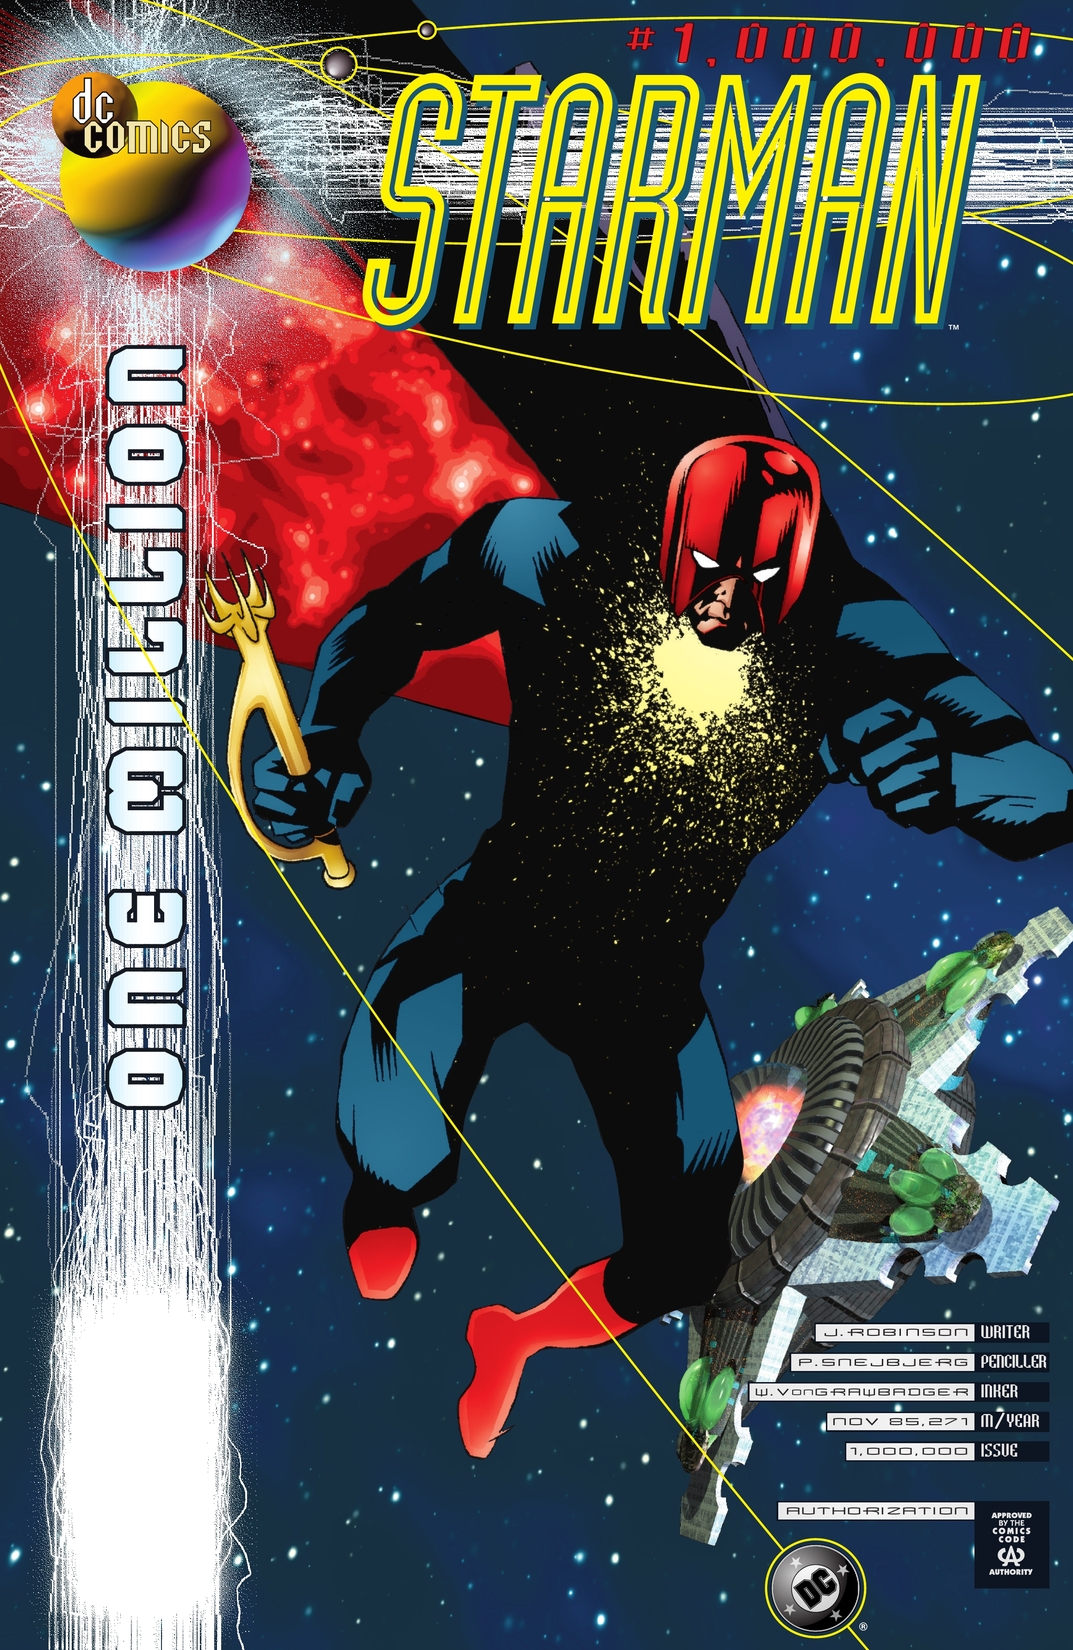 Starman #1000000 preview images